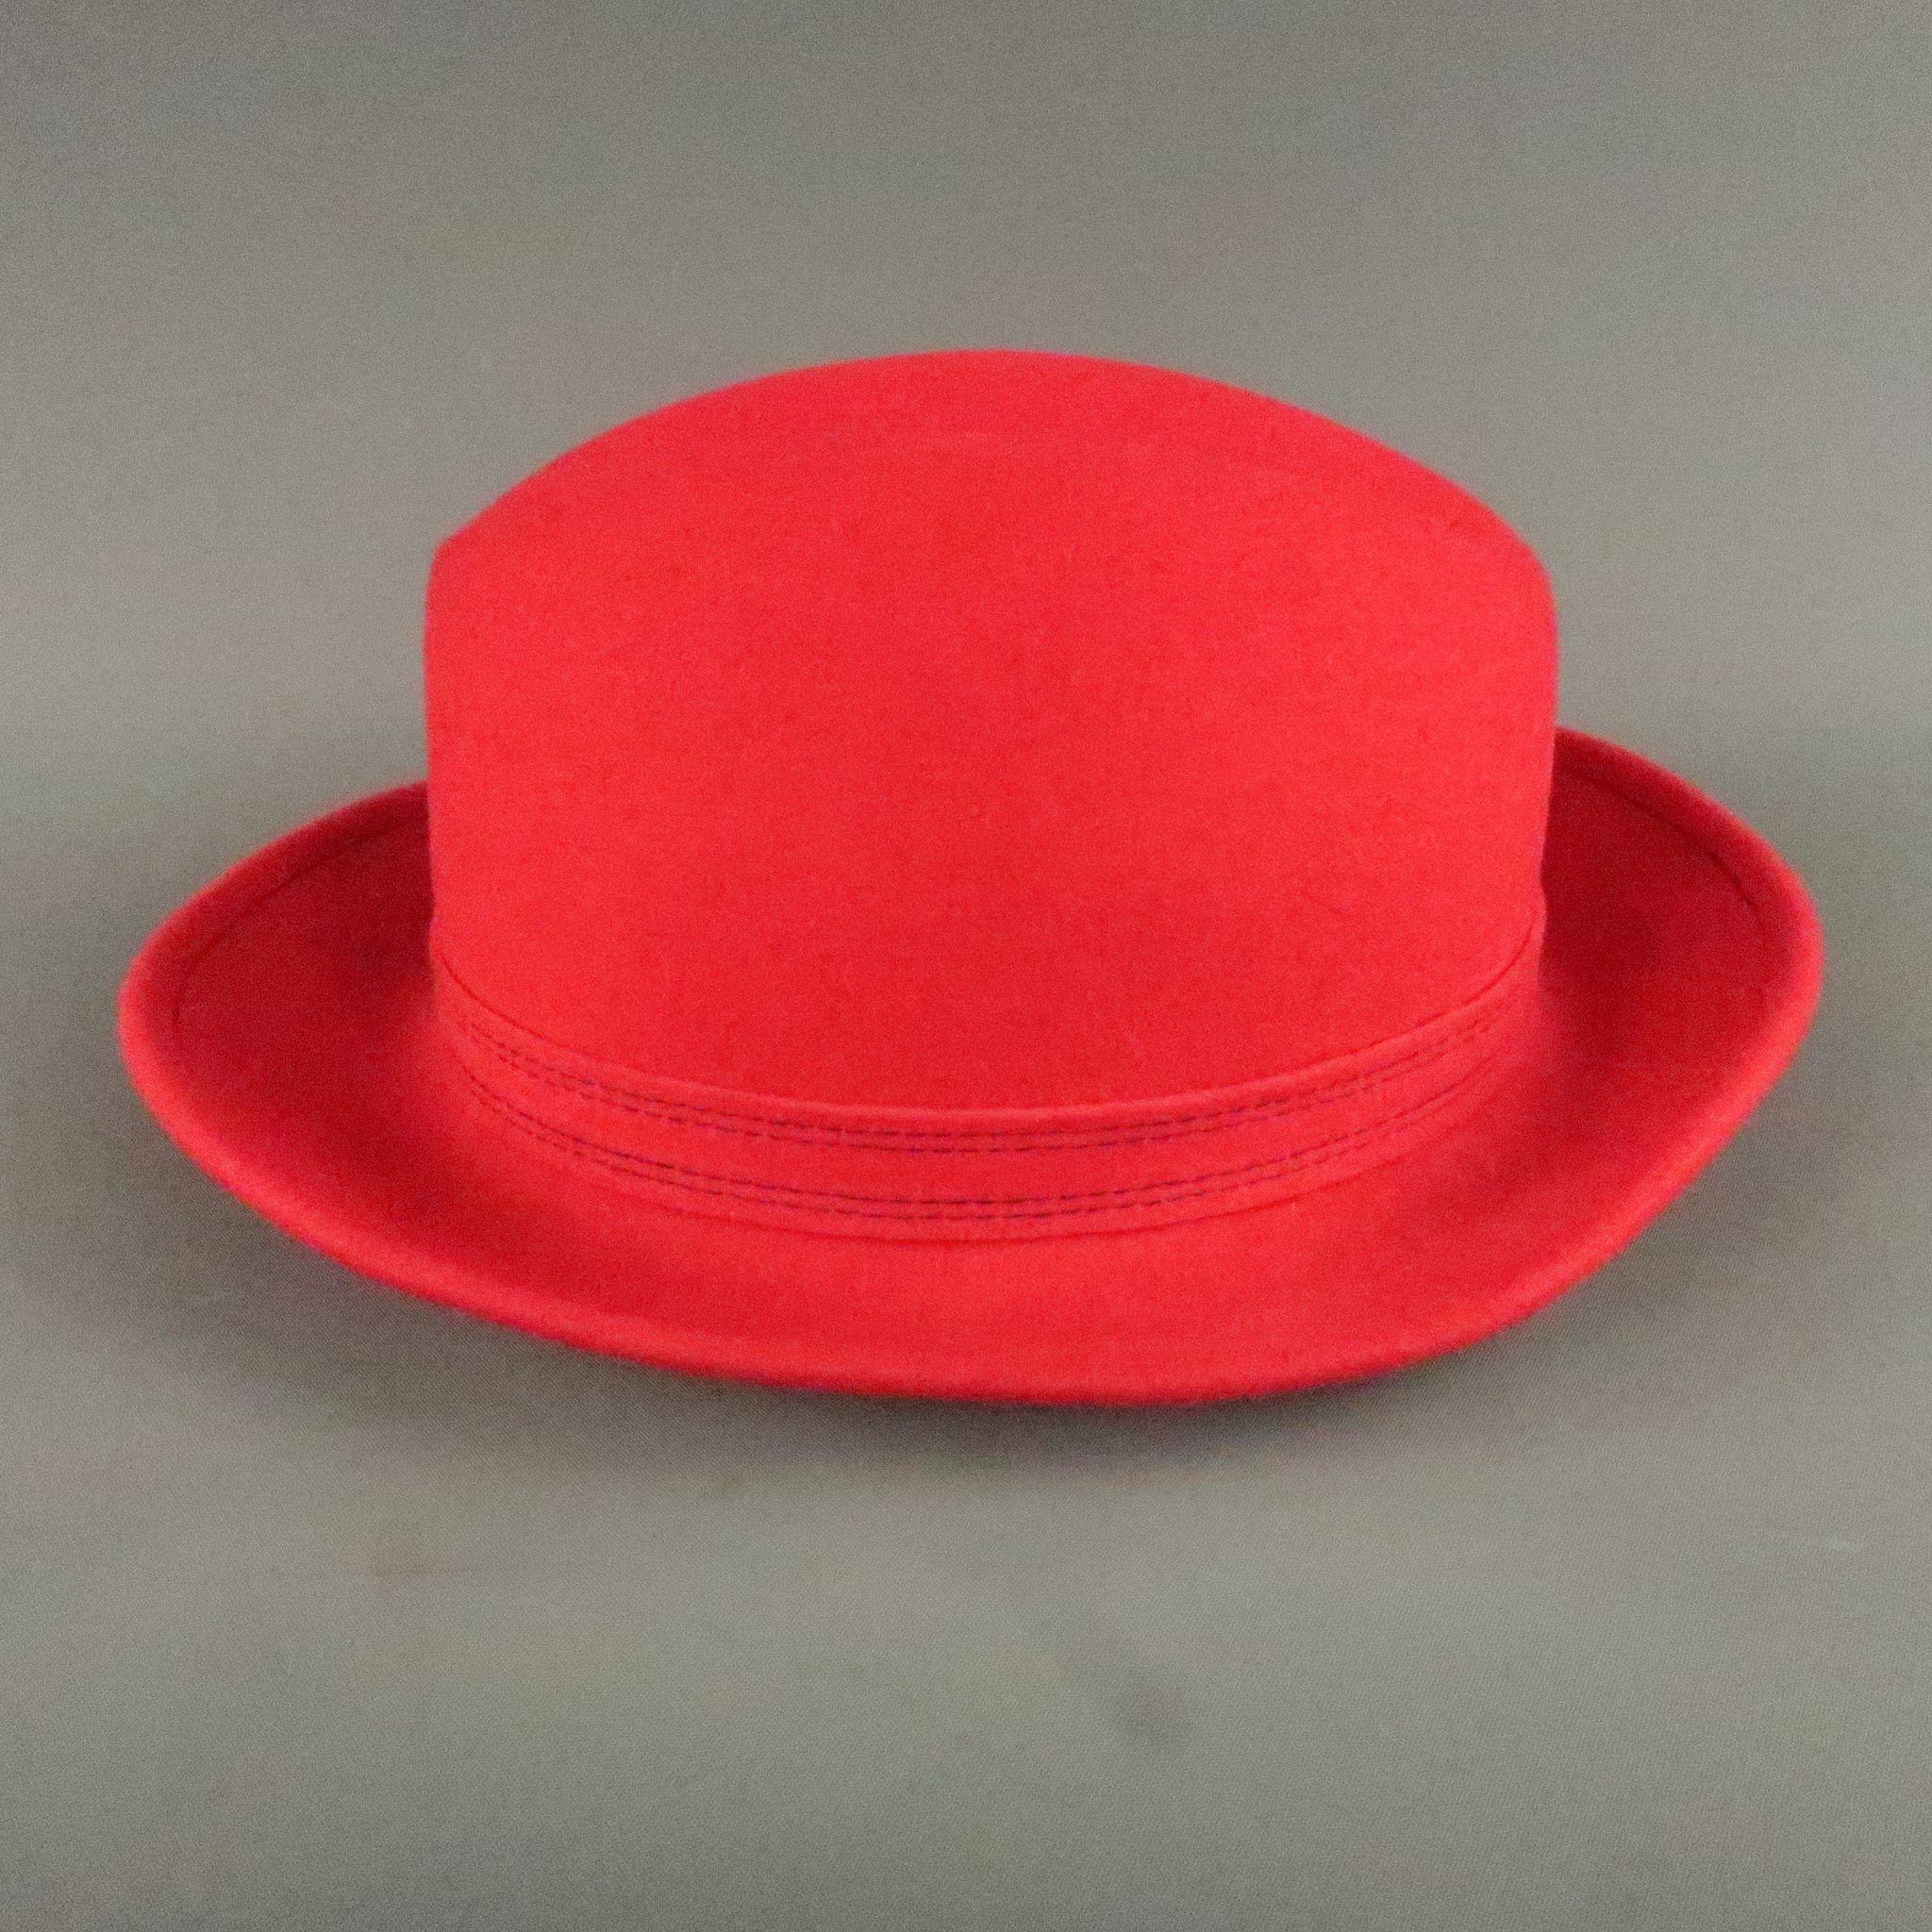 SAKS FIFTH AVENUE hat comes in a red felt wool with contrast stitching, and a feather accent.

Very Good Pre-Owned Condition.
Marked: ( no size )

Measurements:
Opening: 22.8 in.
Brim: 2.8 in.
Height: 5.5 in